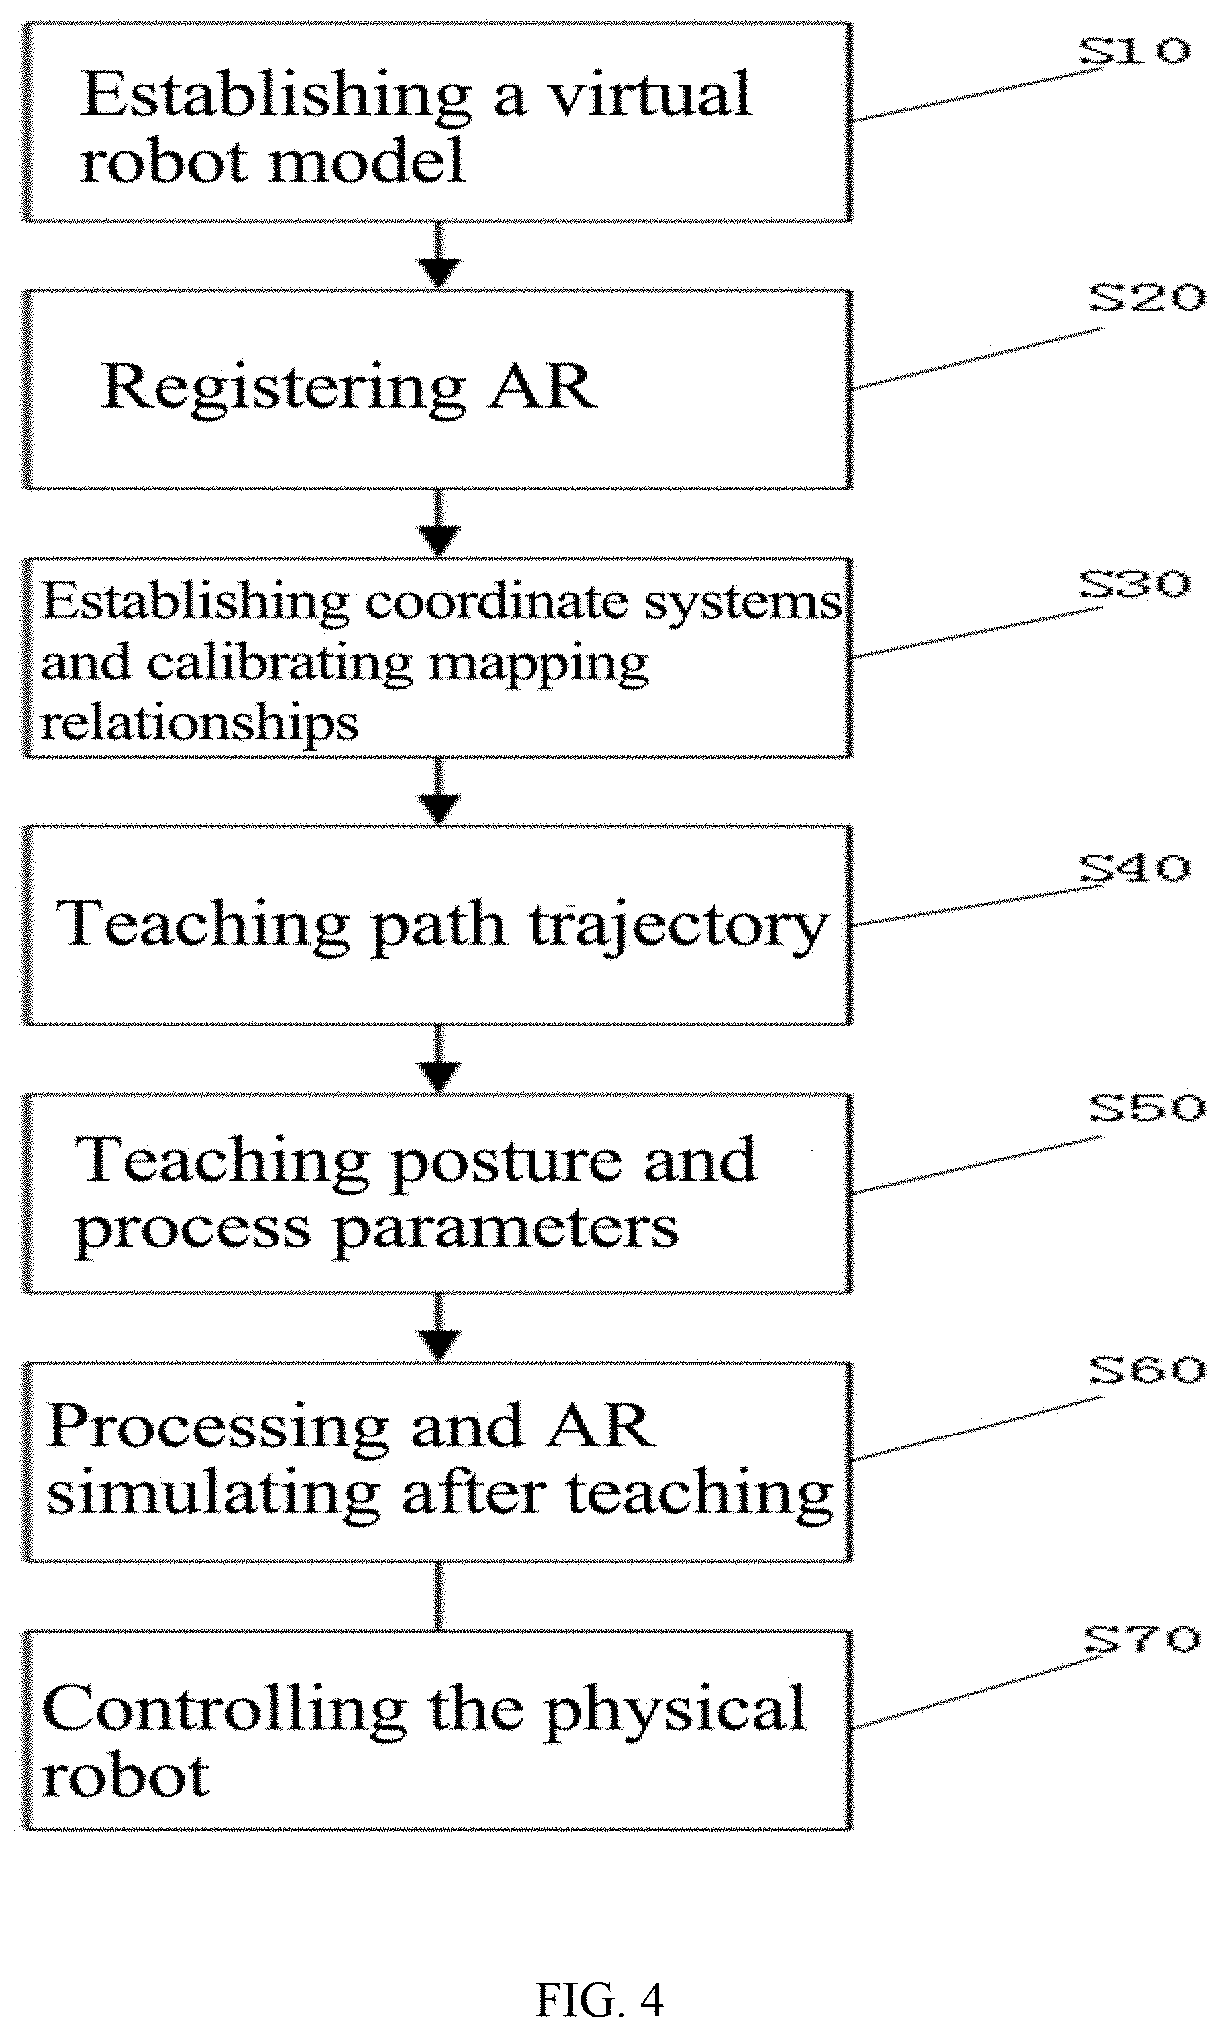 System and method for robot teaching based on rgb-d images and teach pendant